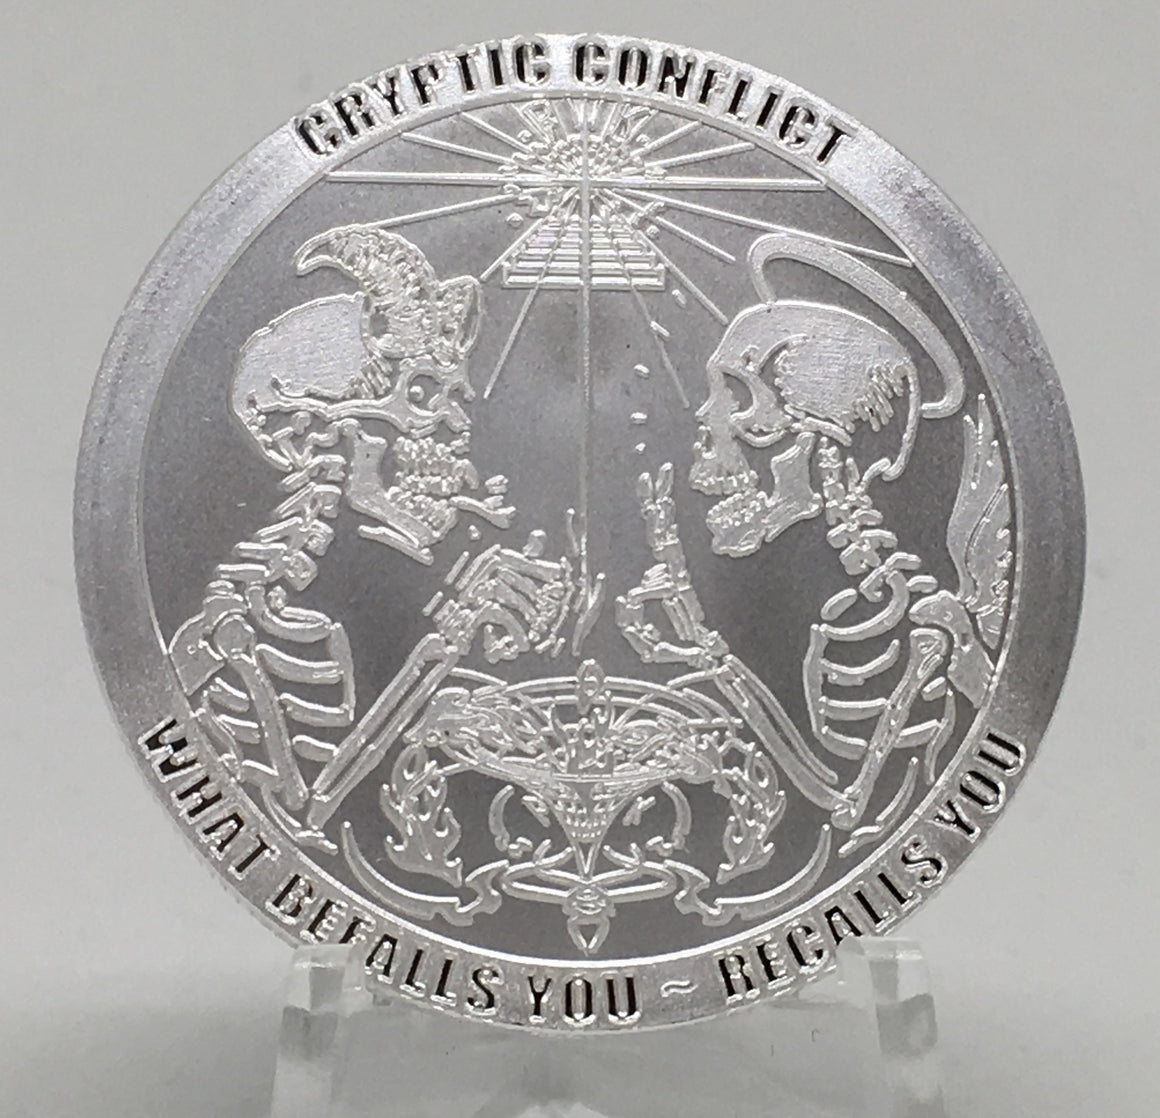 Cryptic Silver Series #3 - Cryptic Conflict, BU Finish by Chautauqua Silver Works, 1oz .999 Silver Round.